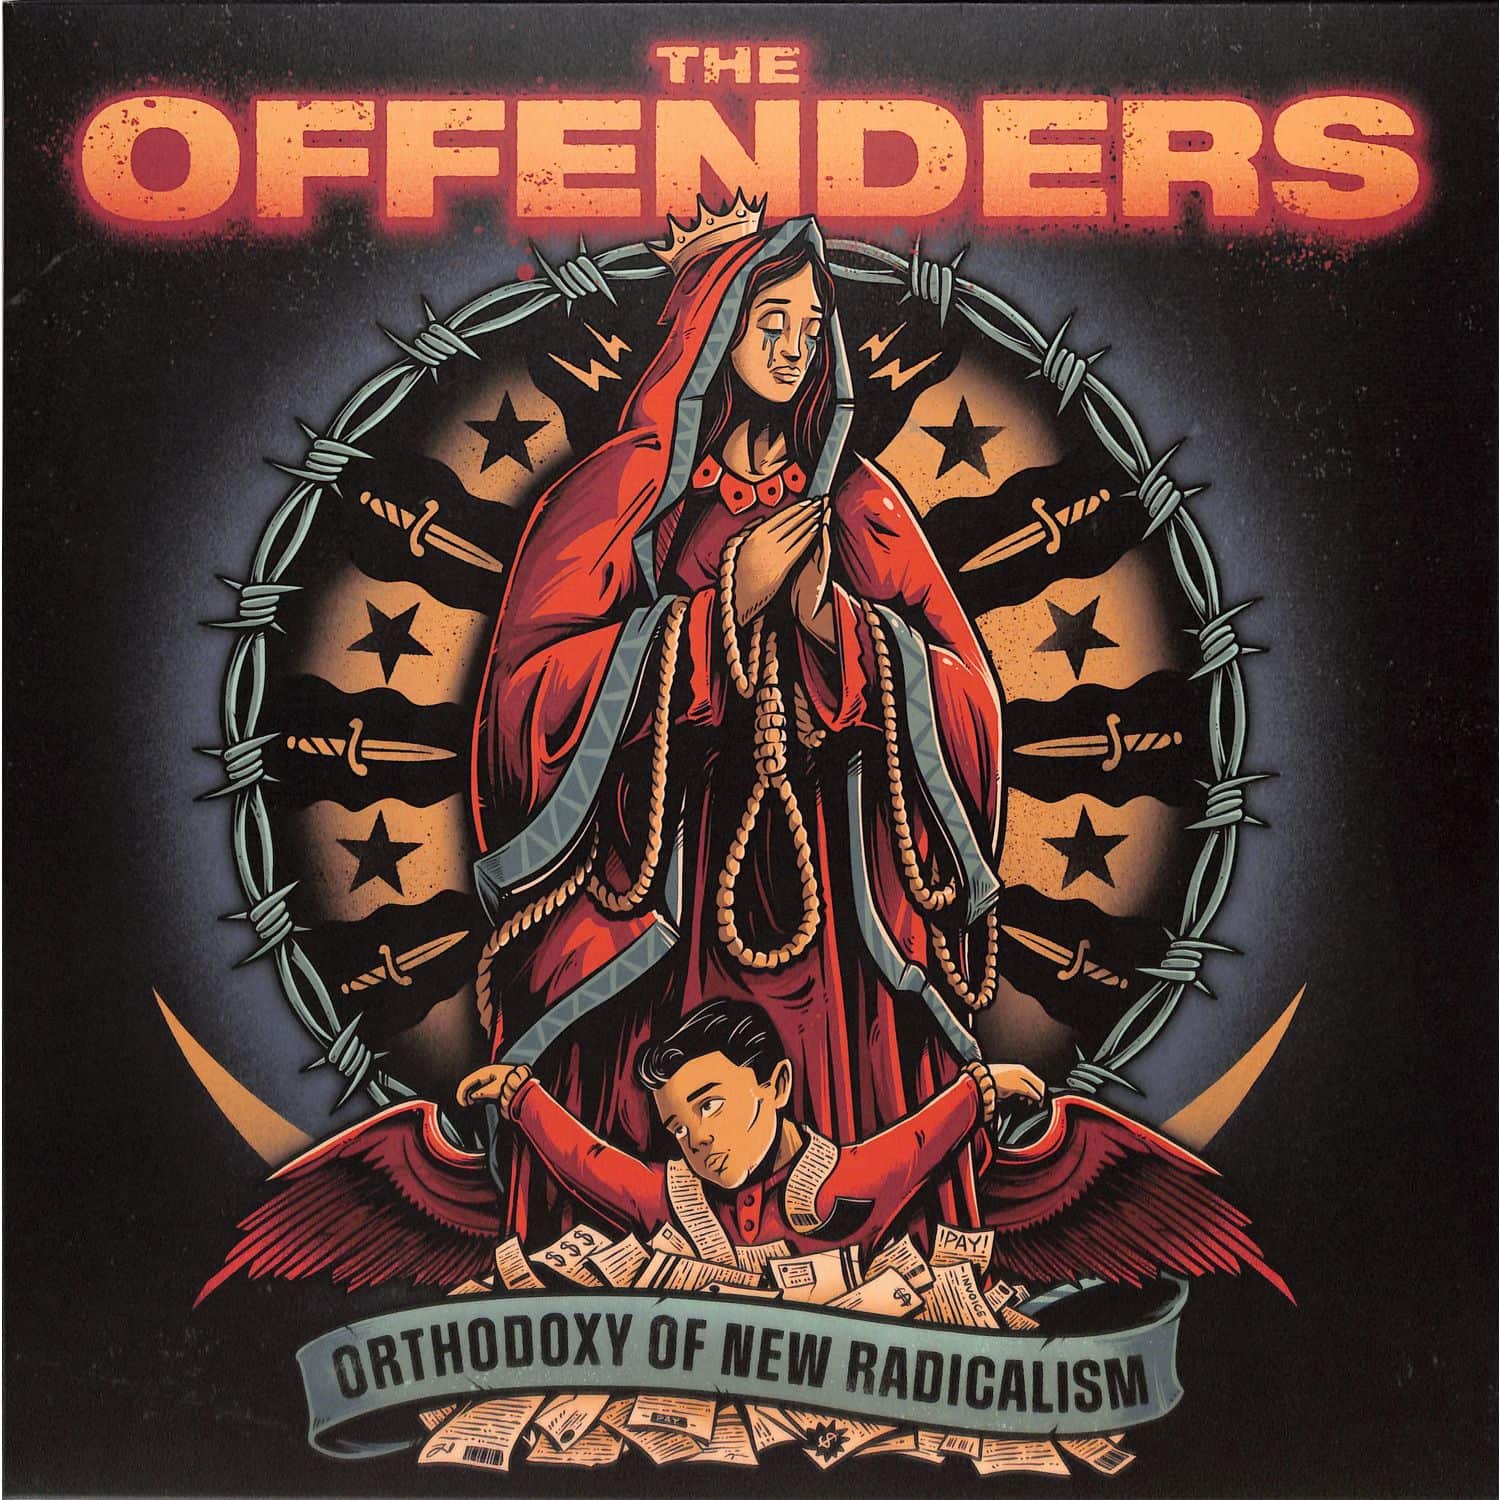  The Offenders - ORTHODOXY OF NEW RADICALISM 